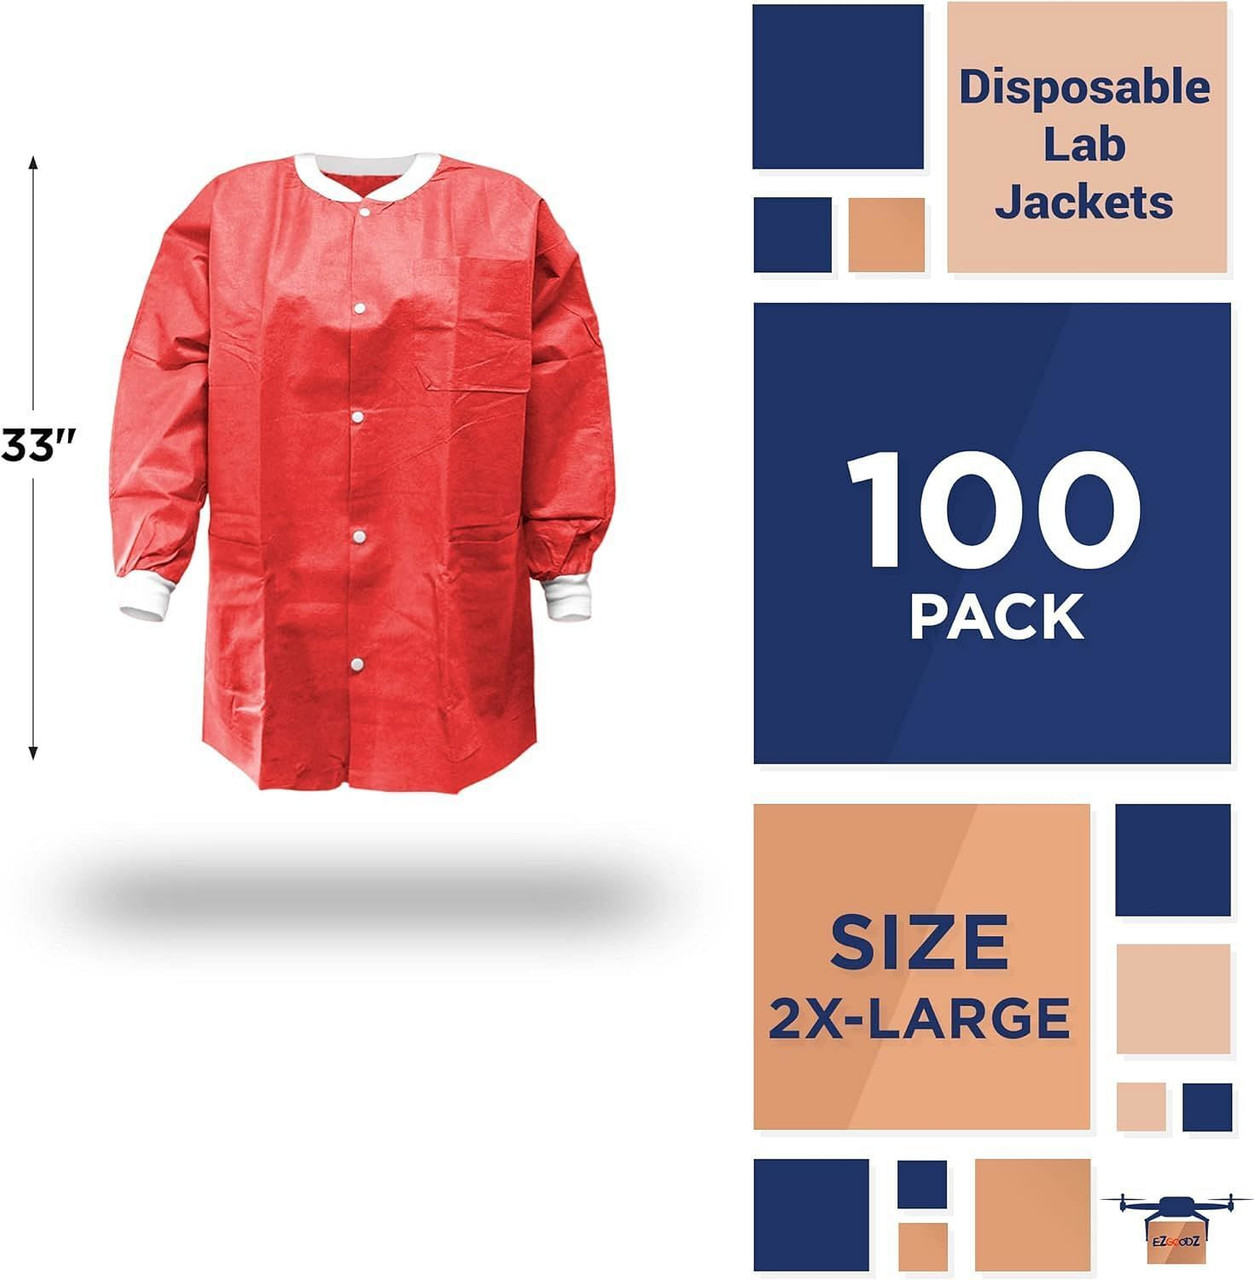 Disposable Lab Jackets; 33" Long. Pack of 100 Red Hip Length Work Gowns XX-Large. SMS 50 gsm Shirts